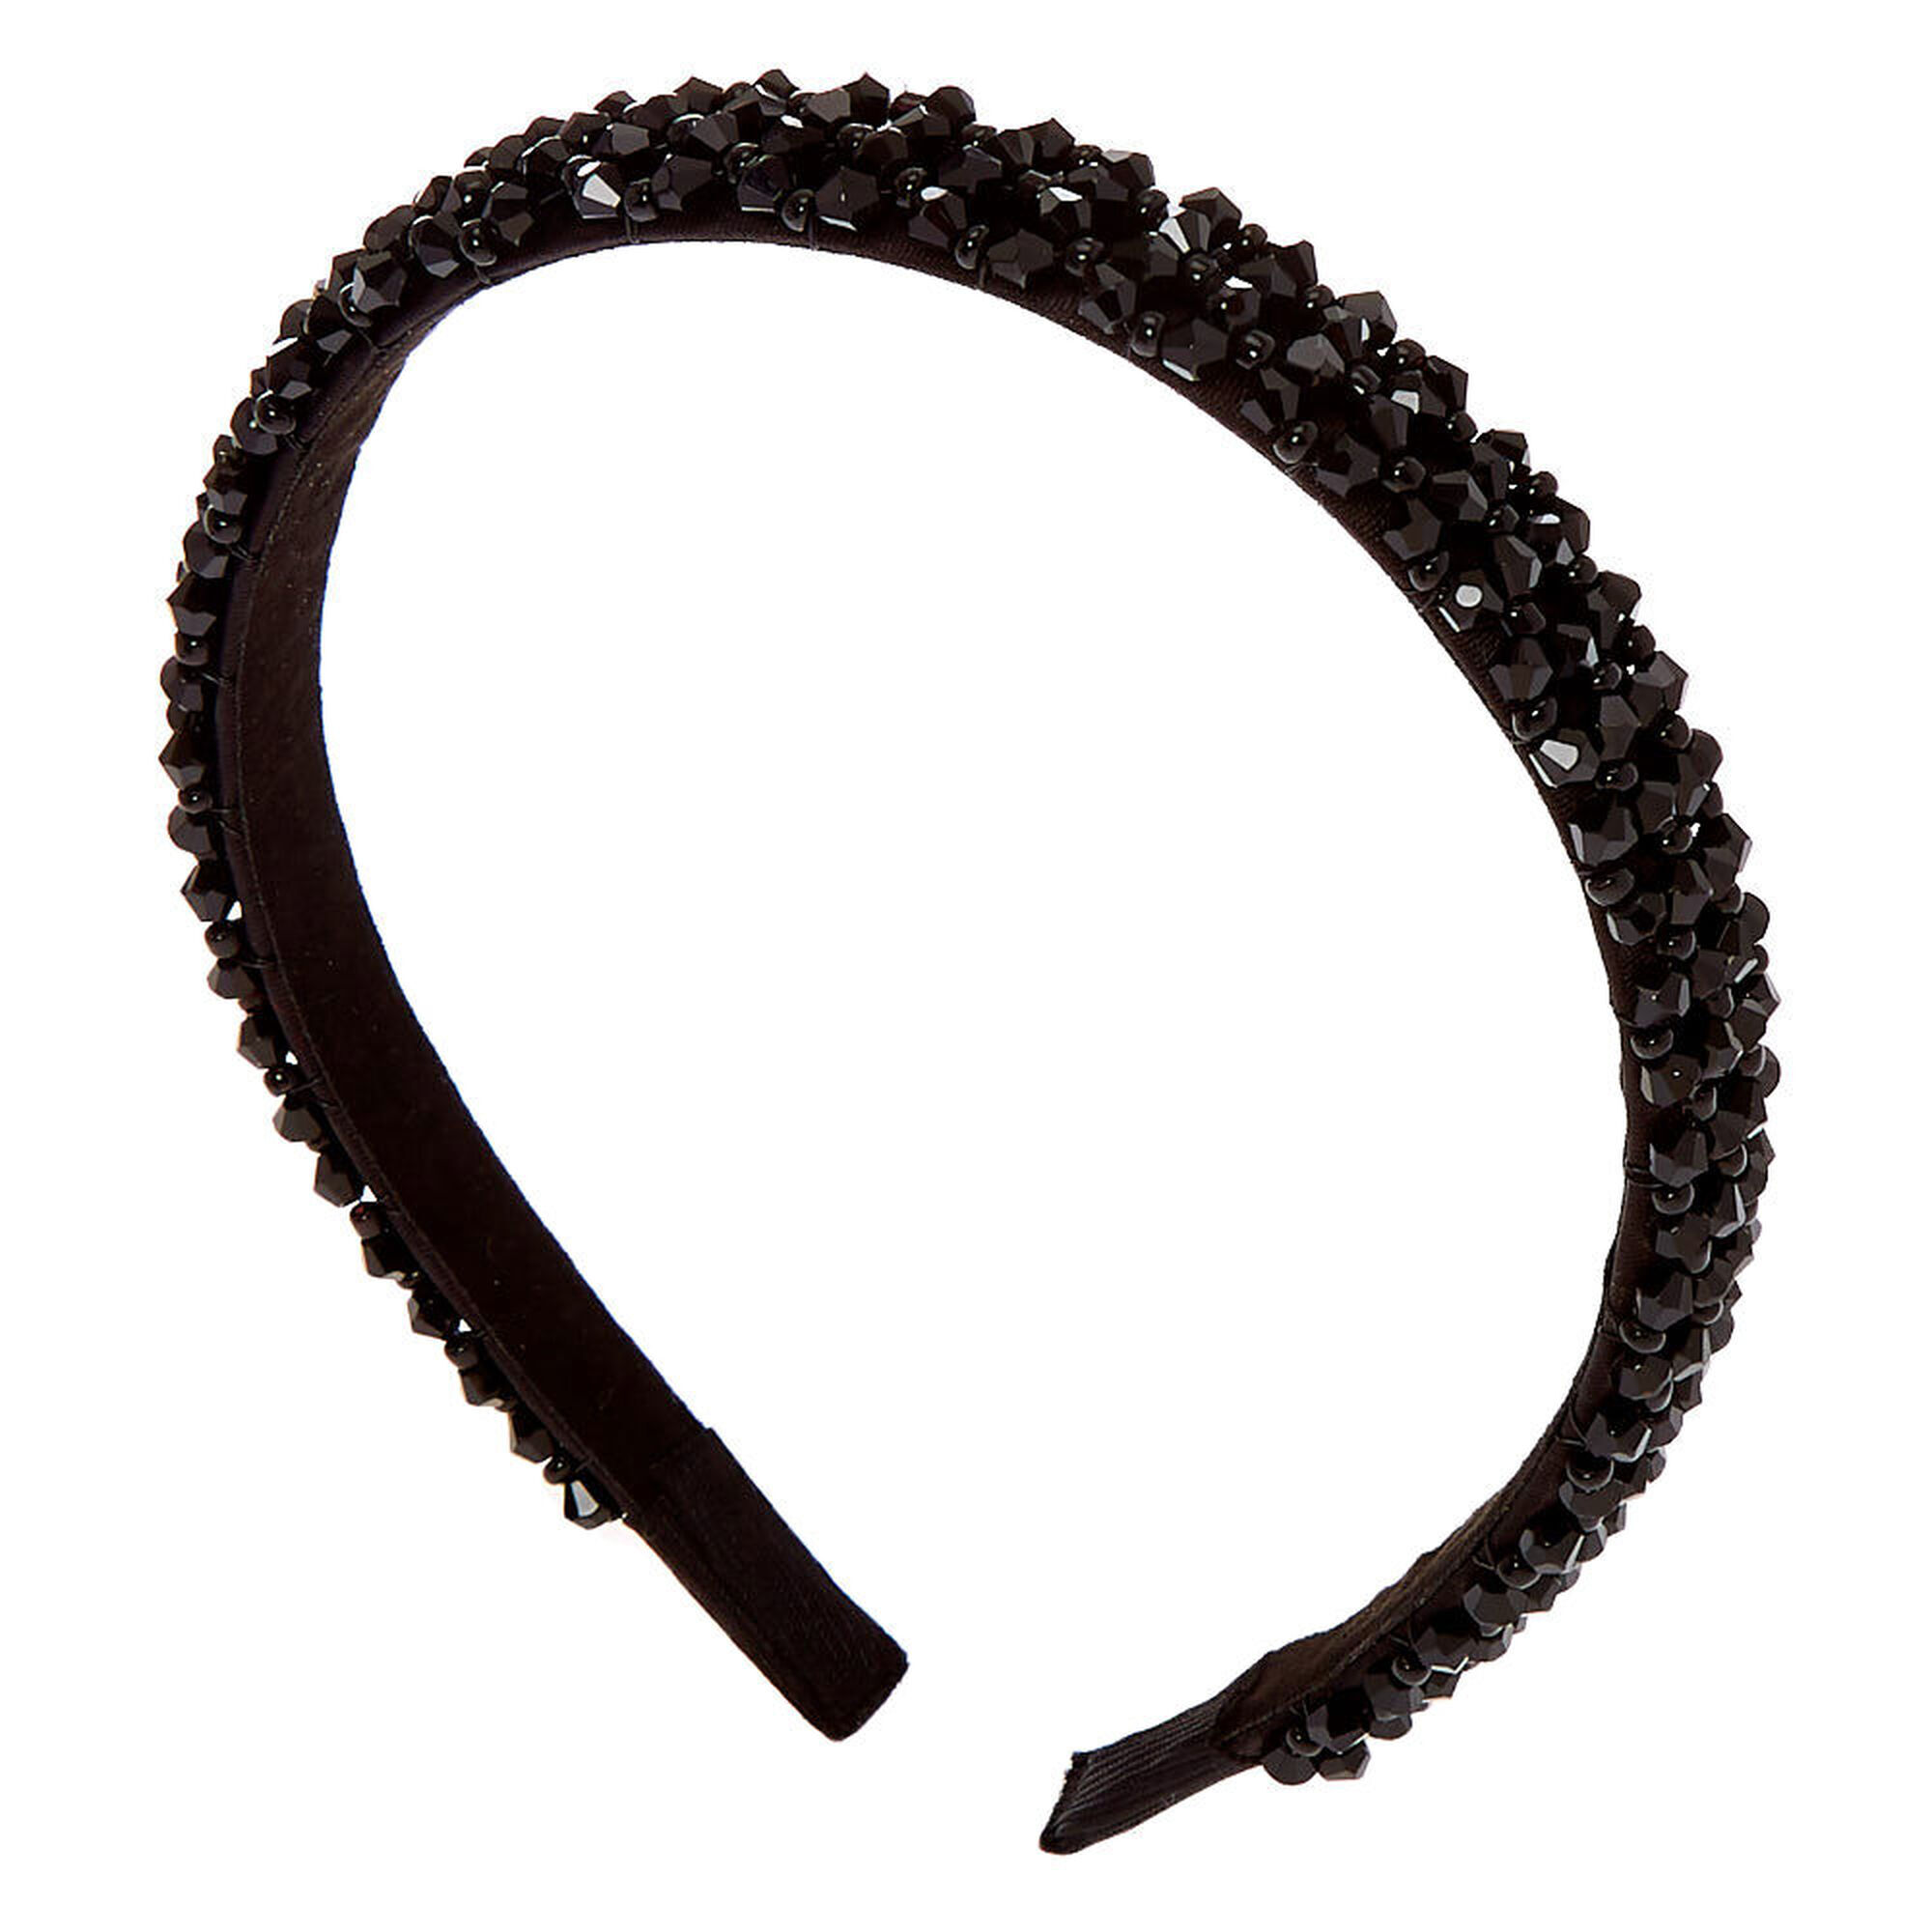 View Claires Faceted Bead Headband Black information